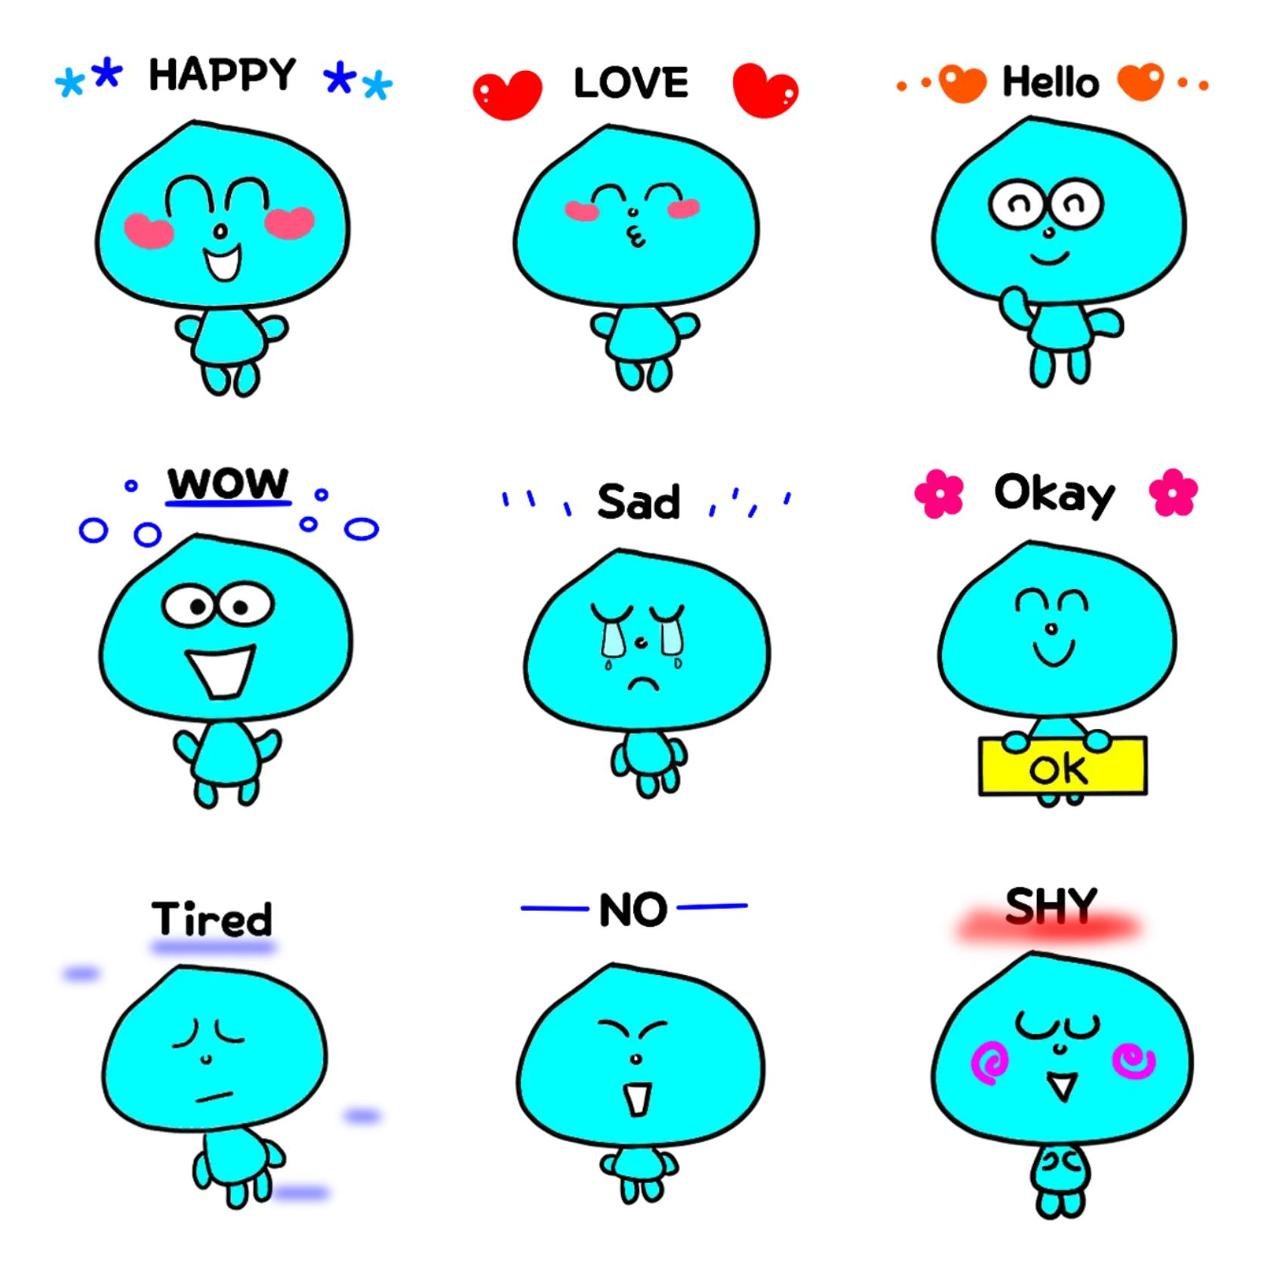 Happy People,Romance sticker pack for Whatsapp, Telegram, Signal, and others chatting and message apps